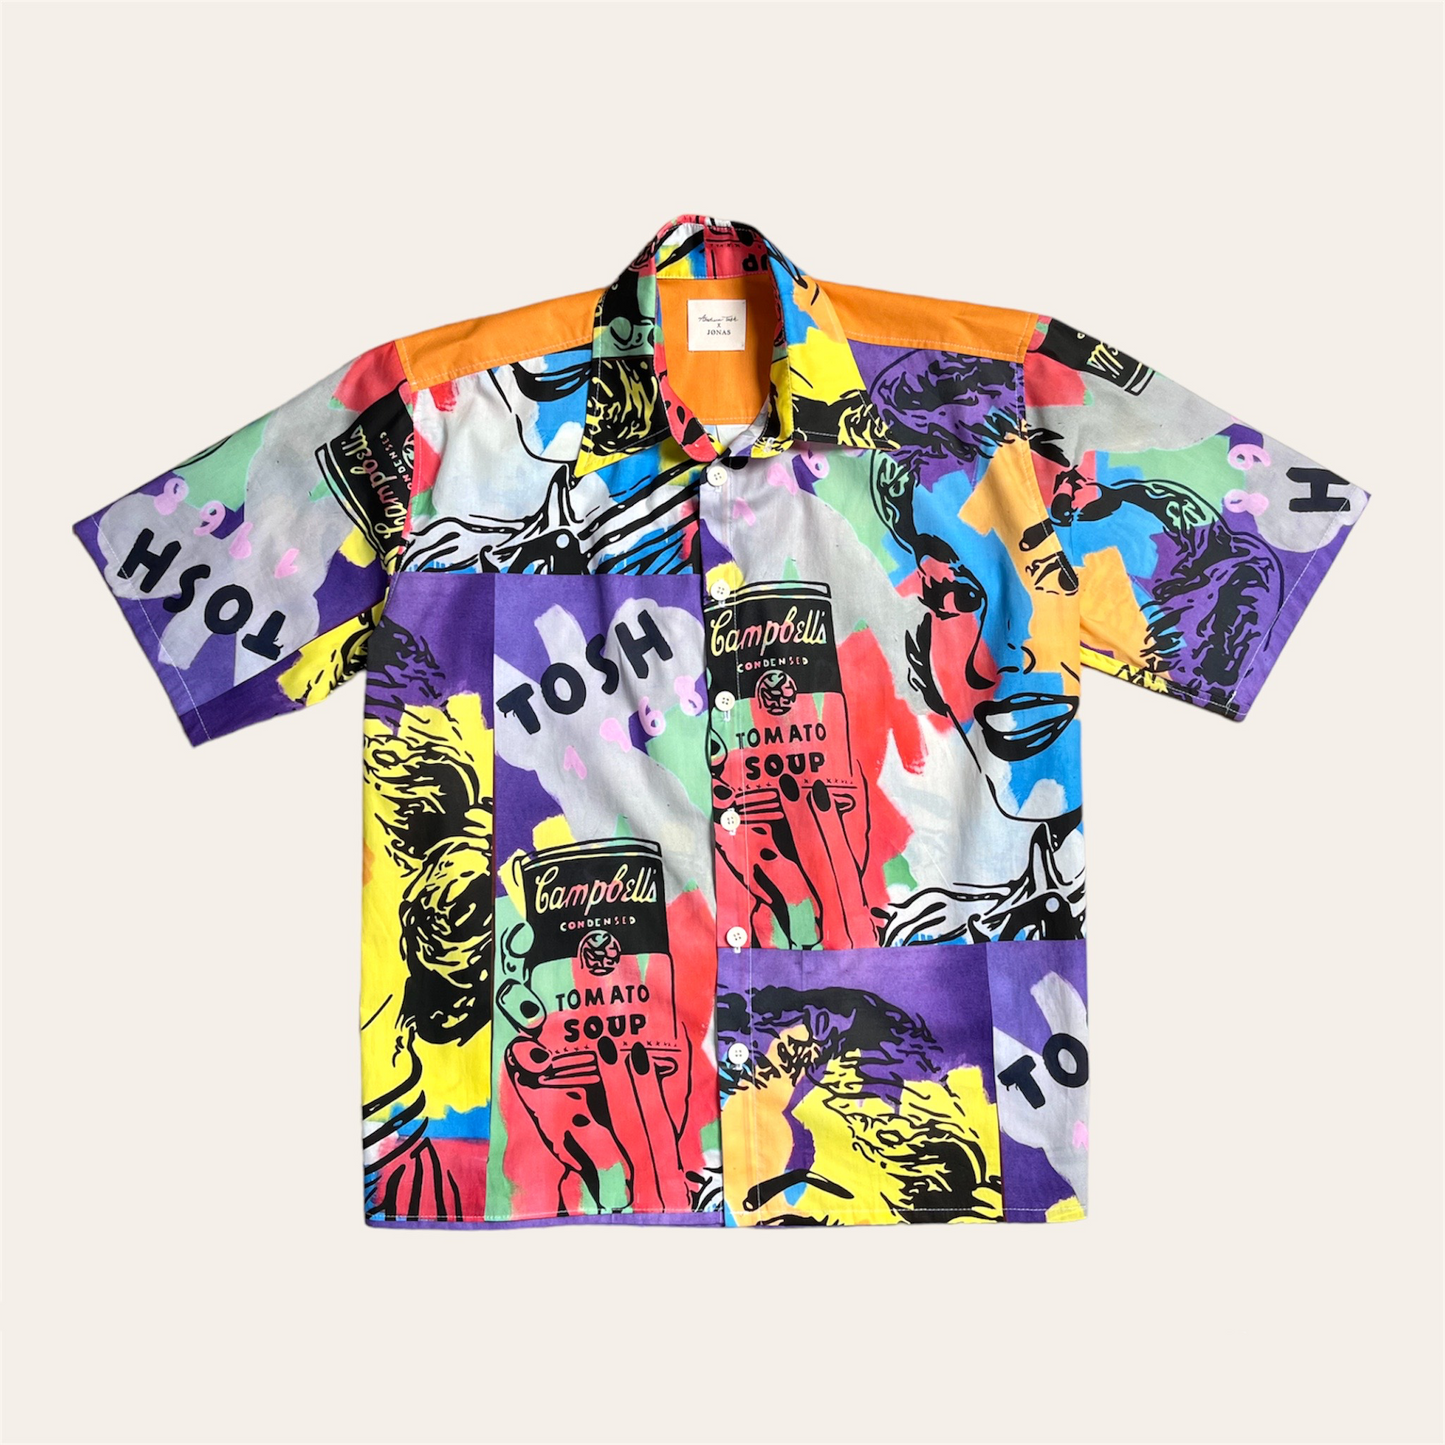 Camicia ANDREW TOSH X JØNAS ( LIMITED EDITION)